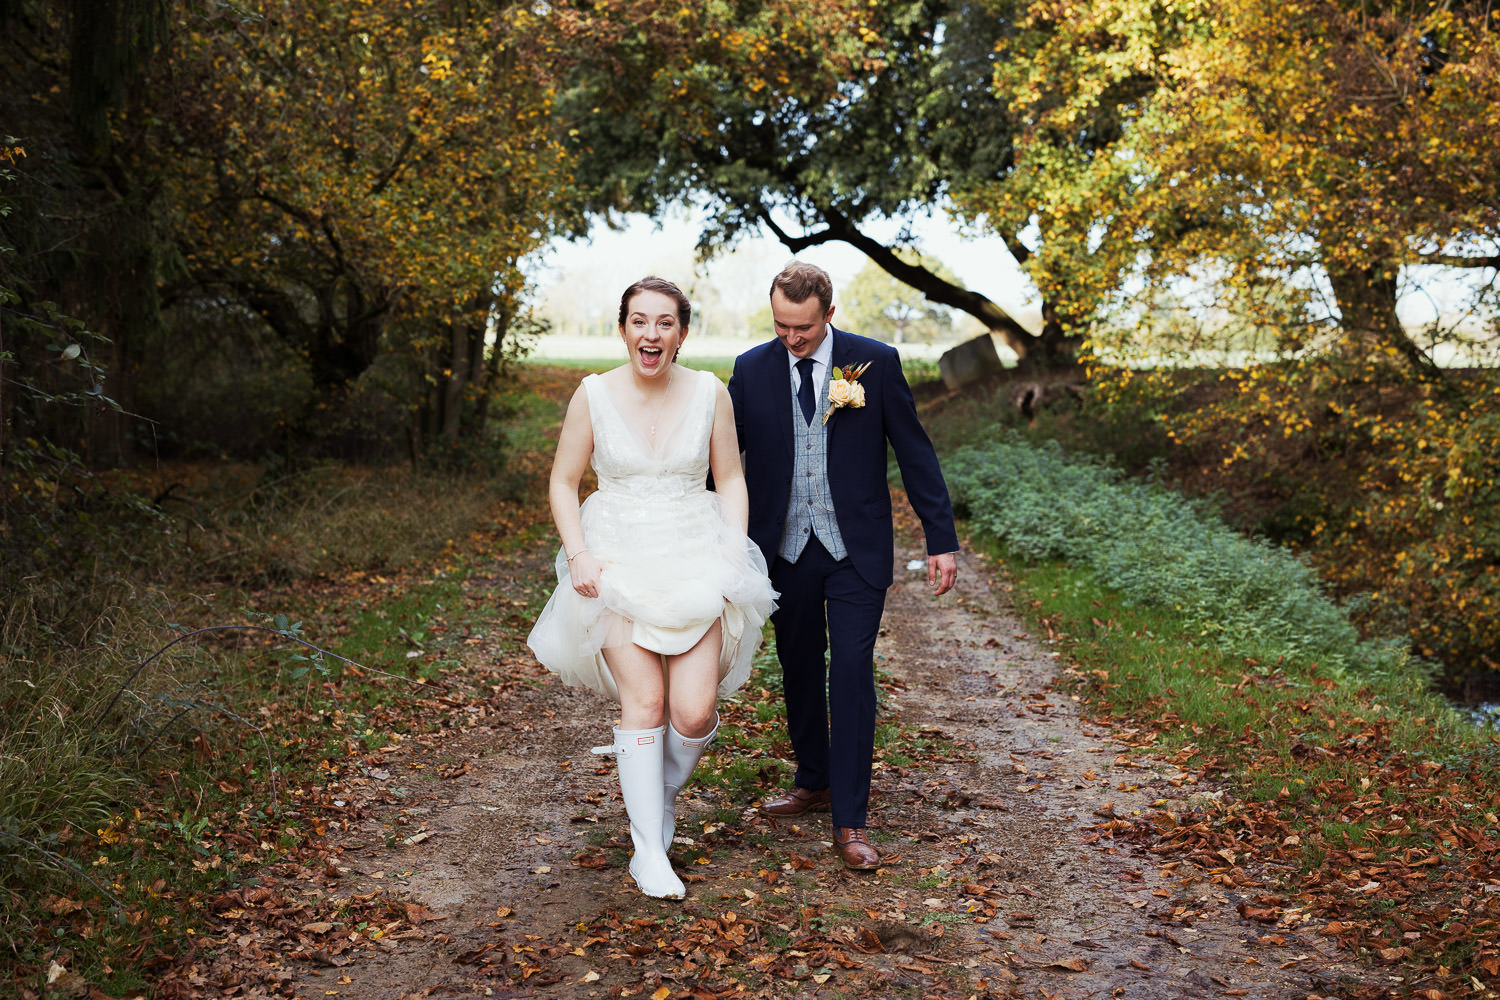 Newly married couple at Houchins in Essex. They are walking along a muddy lane covered with autumnal leaves. The bride is holding up her Jenny Packham dress to reveal her Hunter wellies.